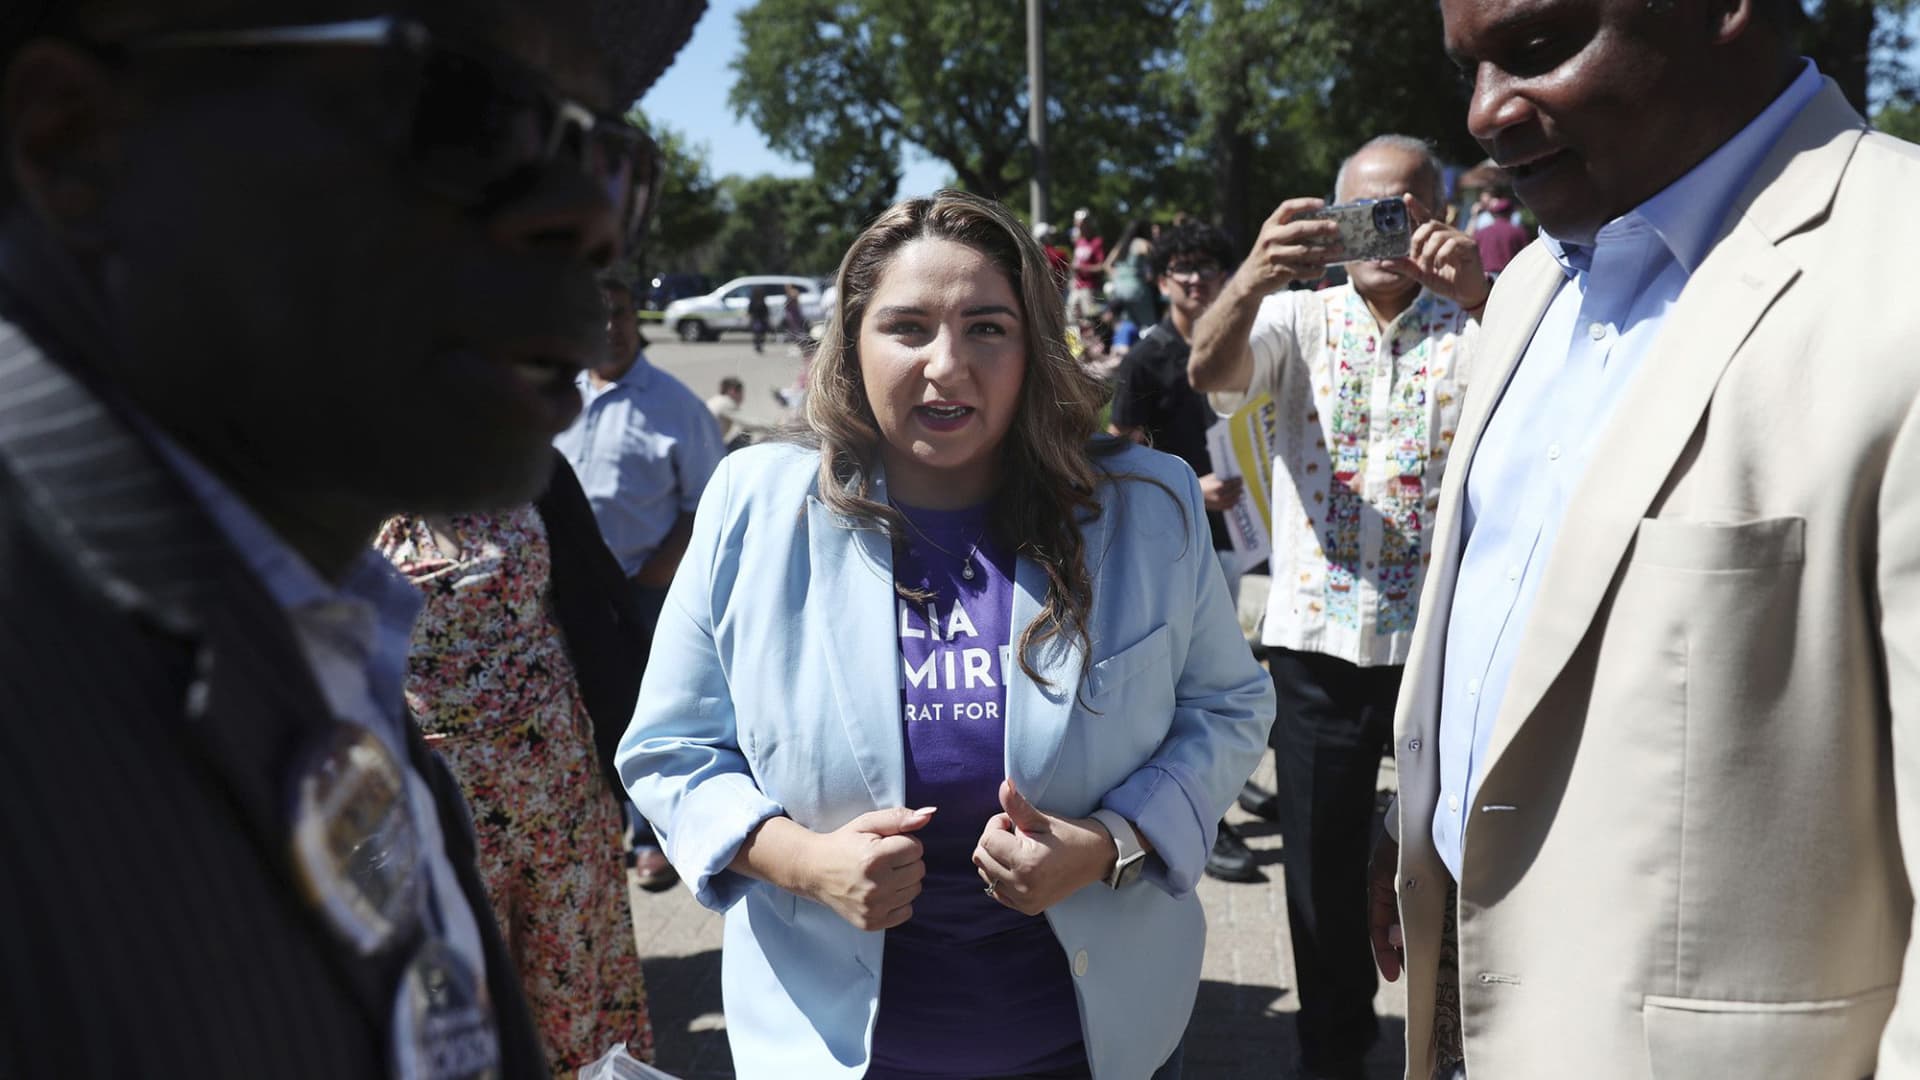 Delia Ramirez, candidate for the 3rd Congressional District, arrives at Humboldt Park on Saturday, June 18, 2022. Sen. Bernie Sanders spoke in support for Ramirez and Jonathan Jackson, right, candidate for the 1st Congressional District. (John J. Kim/Chicago Tribune/Tribune News Service via Getty Images)